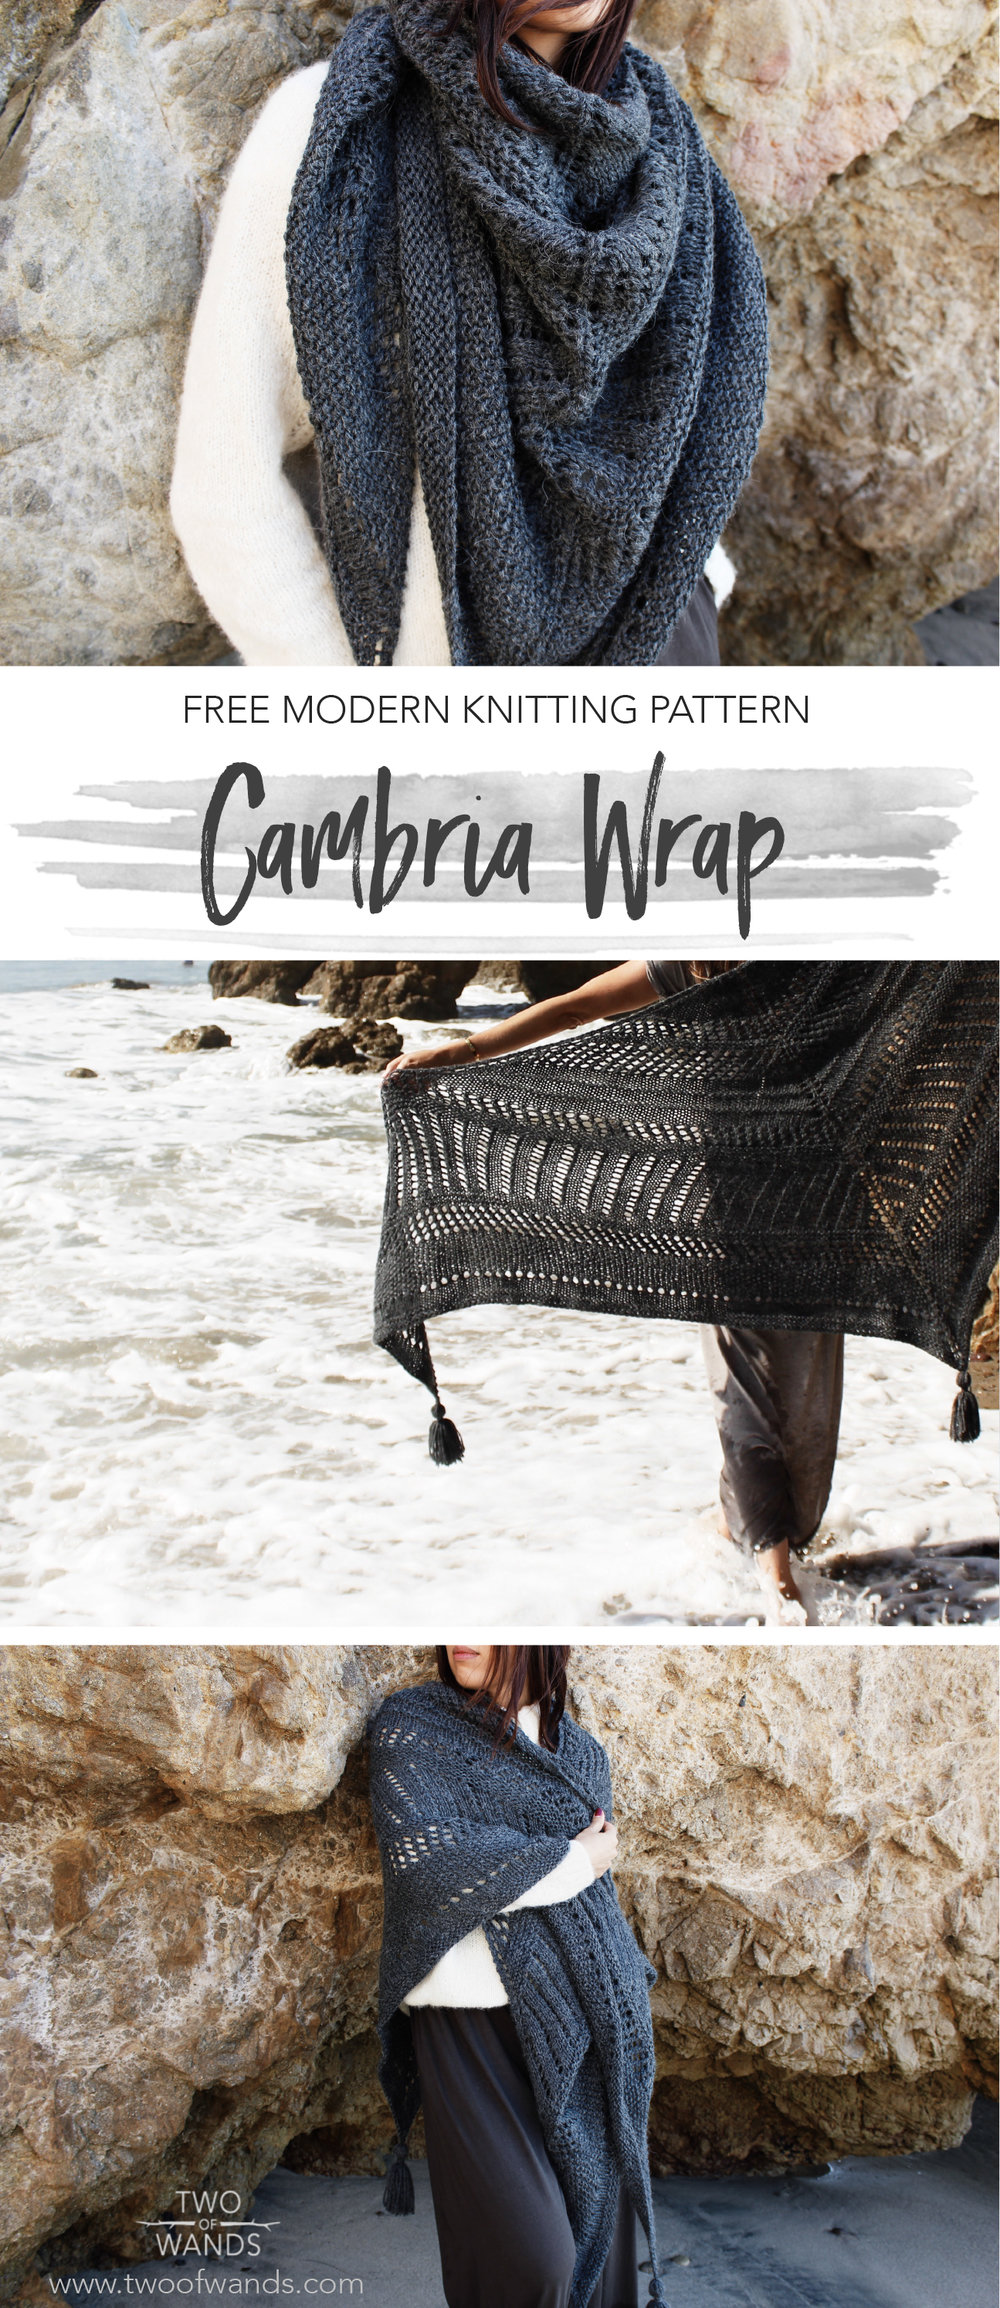 Cambria Wrap pattern by Two of Wands